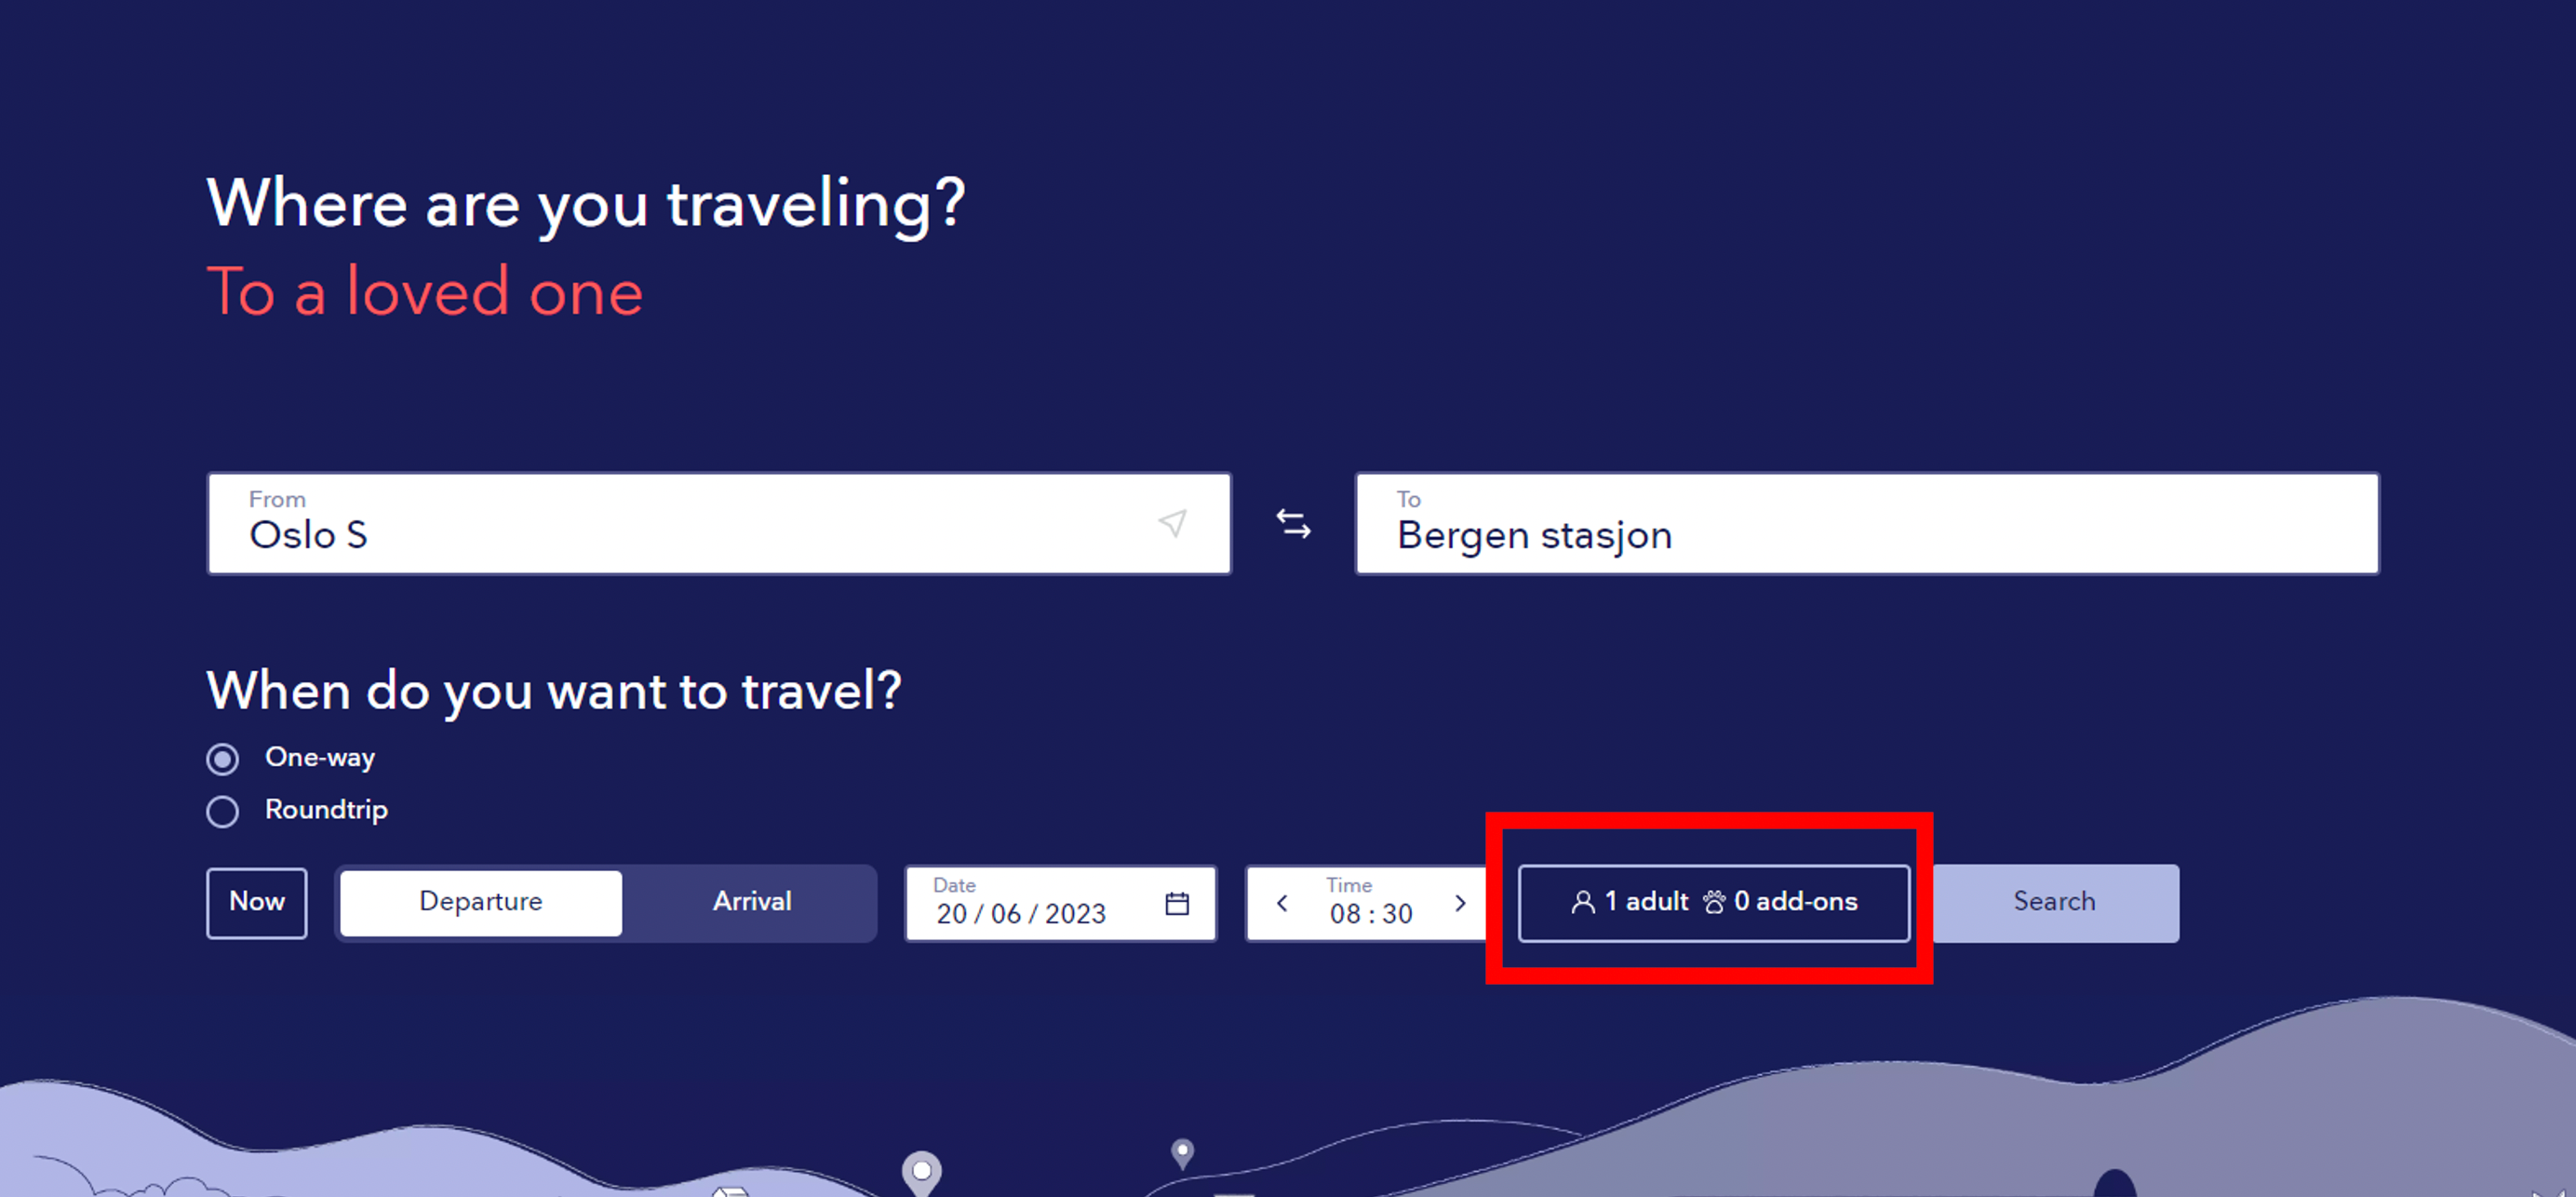 After entering information about departure and destination, open the people picker